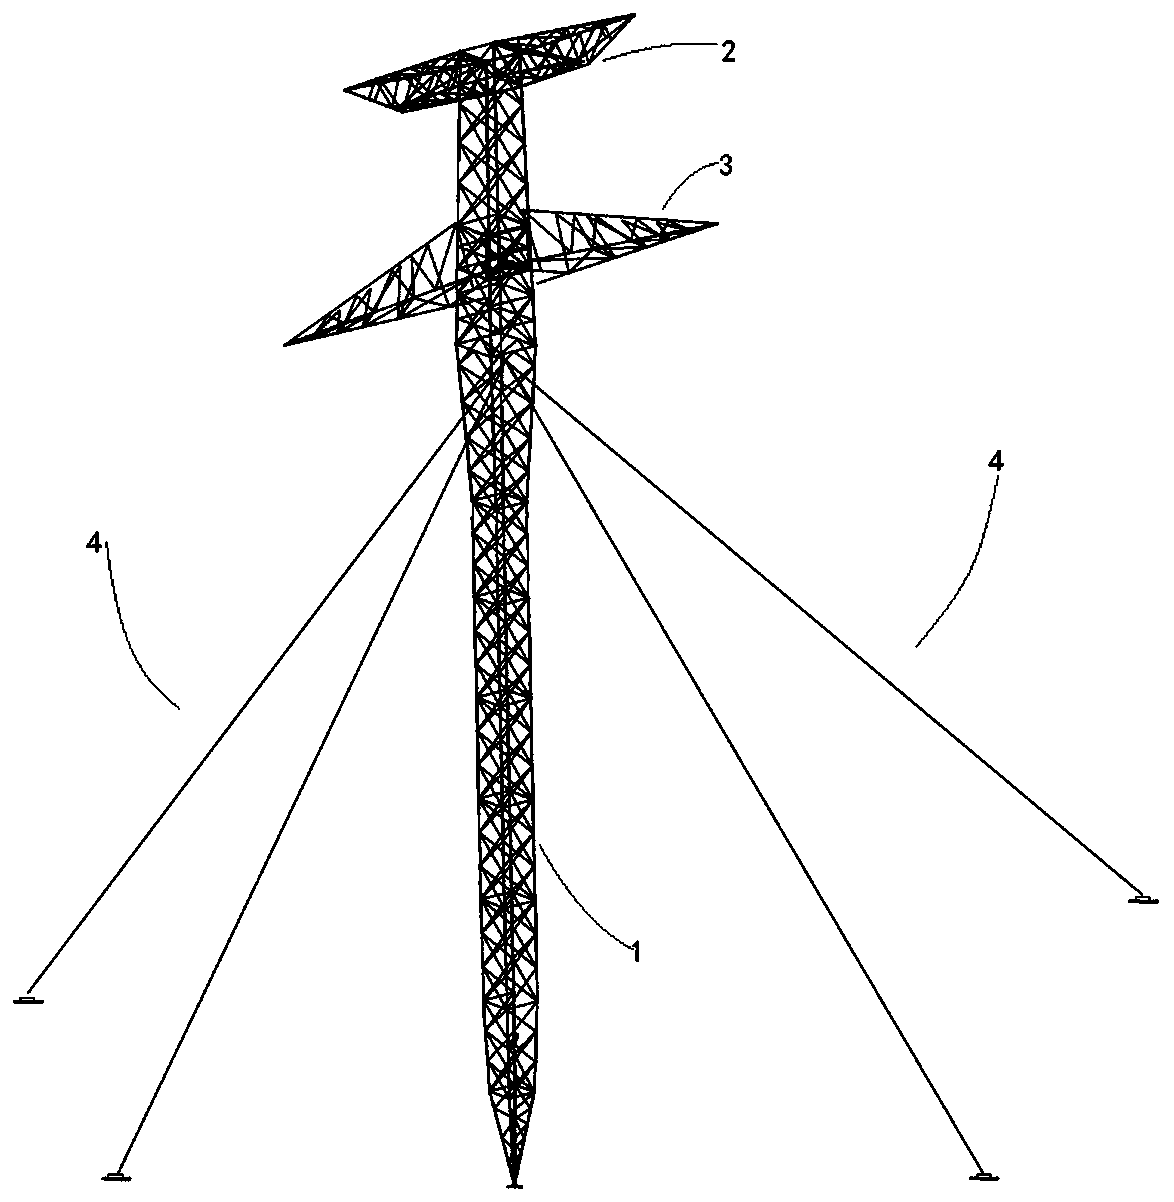 Hoisting method of transmission line guyed tower shaped like Chinese character 'gan'